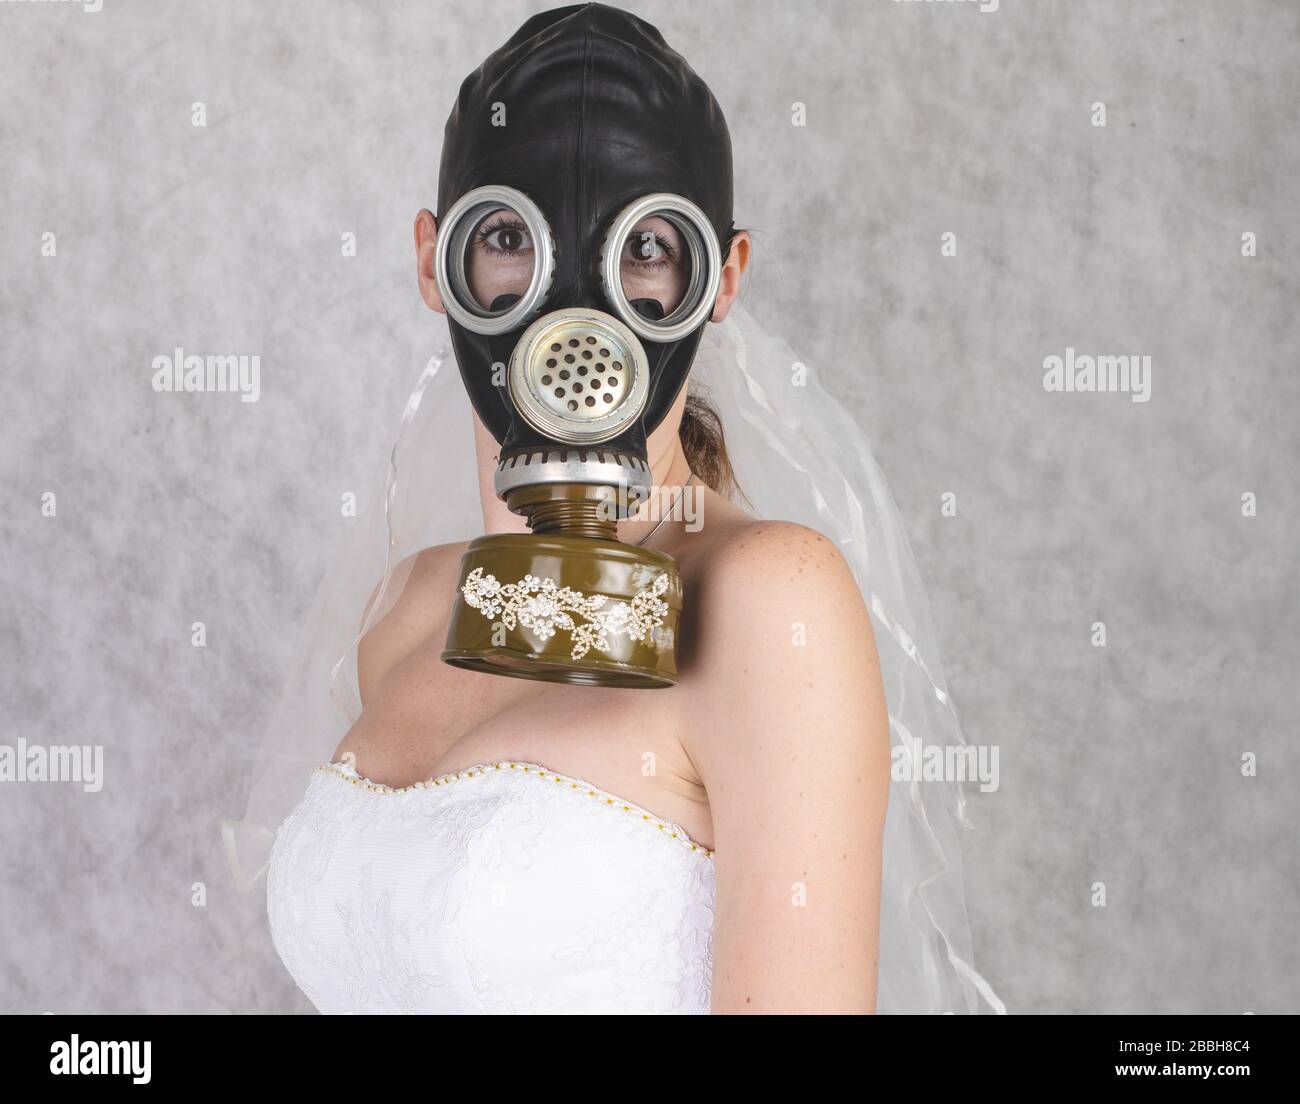 Download this stock image: cyberpunk Bride in veil dress and protective gas ...